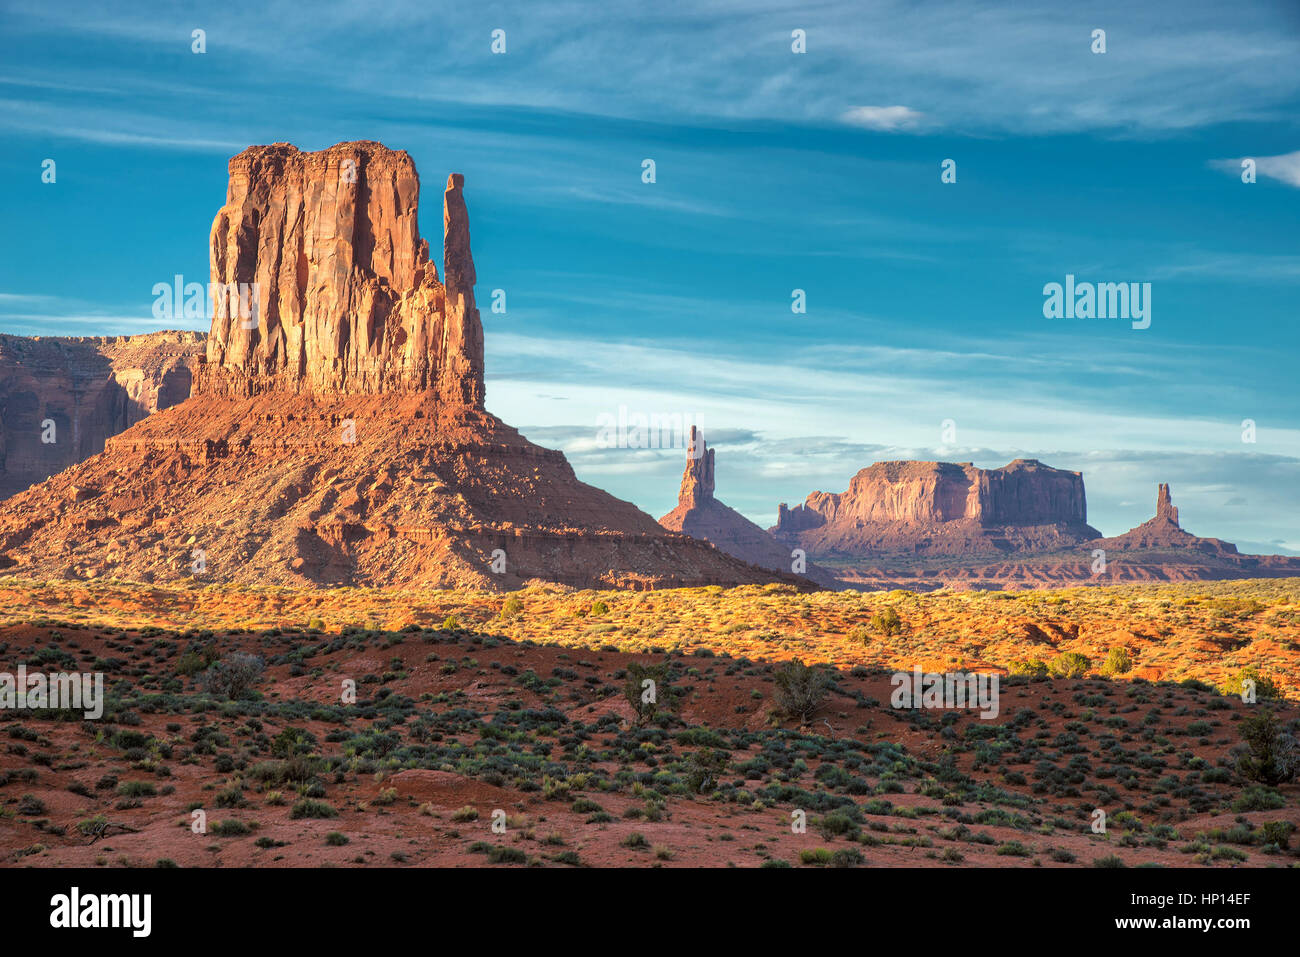 Magical landscape Monument Valley in Arizona. Stock Photo